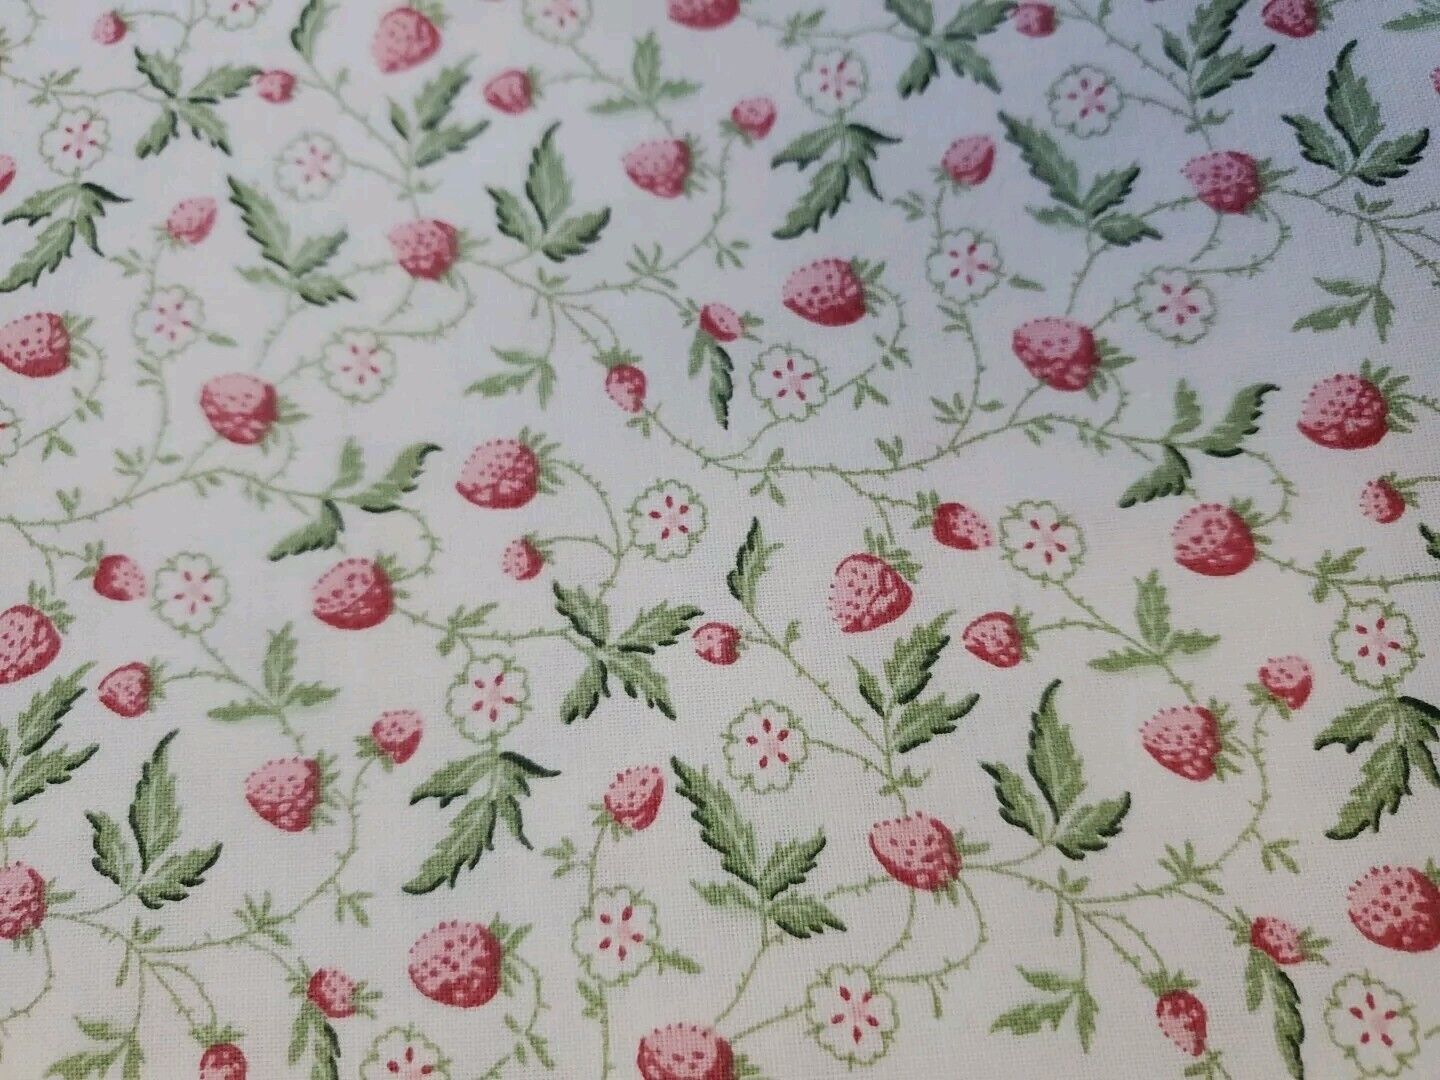 Vintage Laura Ashley English Country Print Strawberries Cotton Fabric 3 Yds.